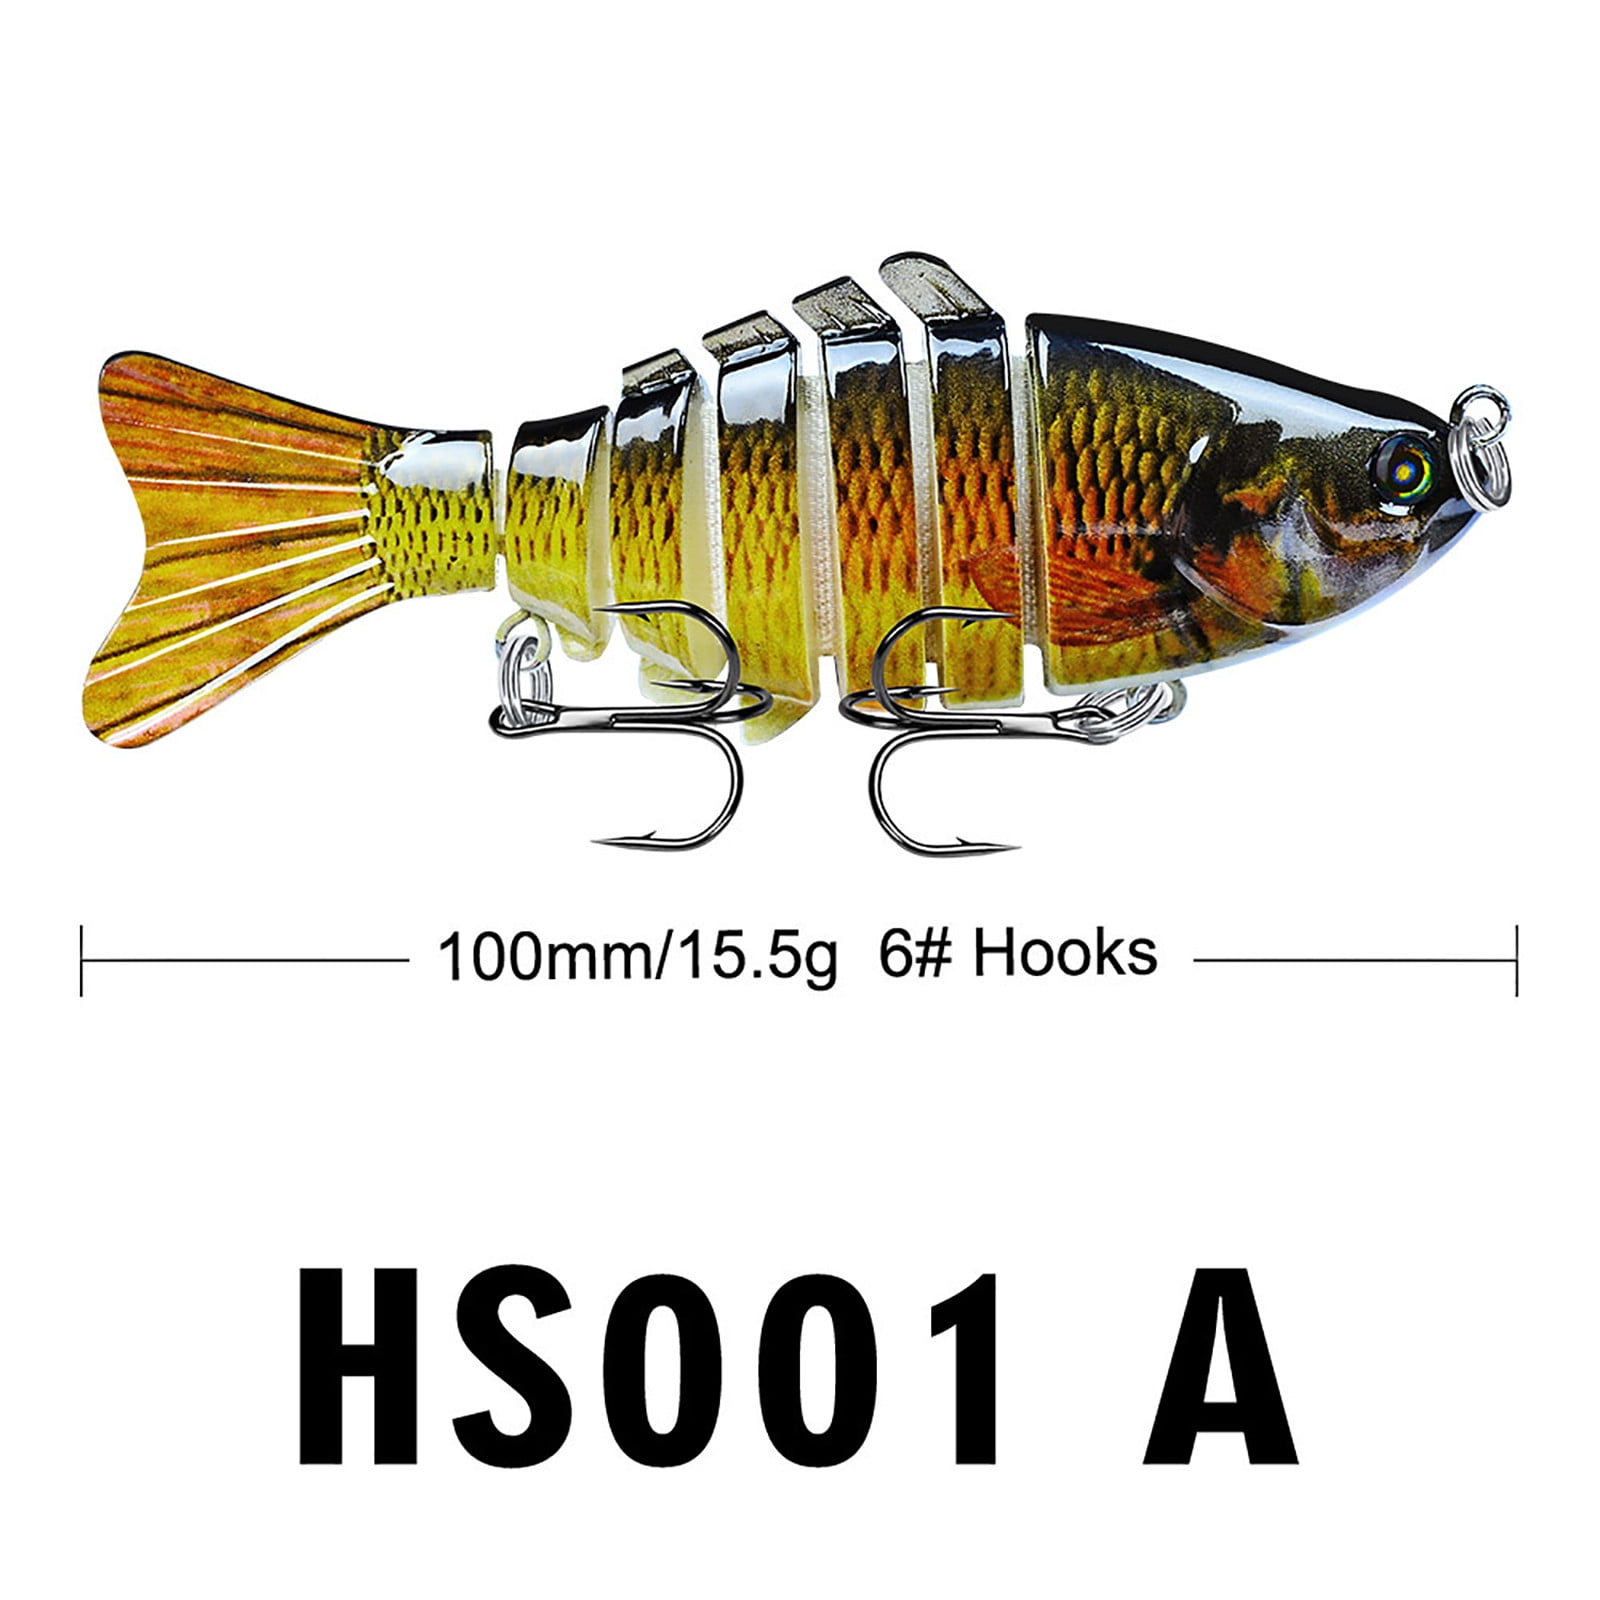  BESPORTBLE 2pcs Fishing Lure Hook Swimbaits Lures Rotating  Tail Fishing Lures Saltwater Angling Fishing Jigs Freshwater Fishing Hook  Crankbait Fishing Bait Propeller Striped Bass : Sports & Outdoors